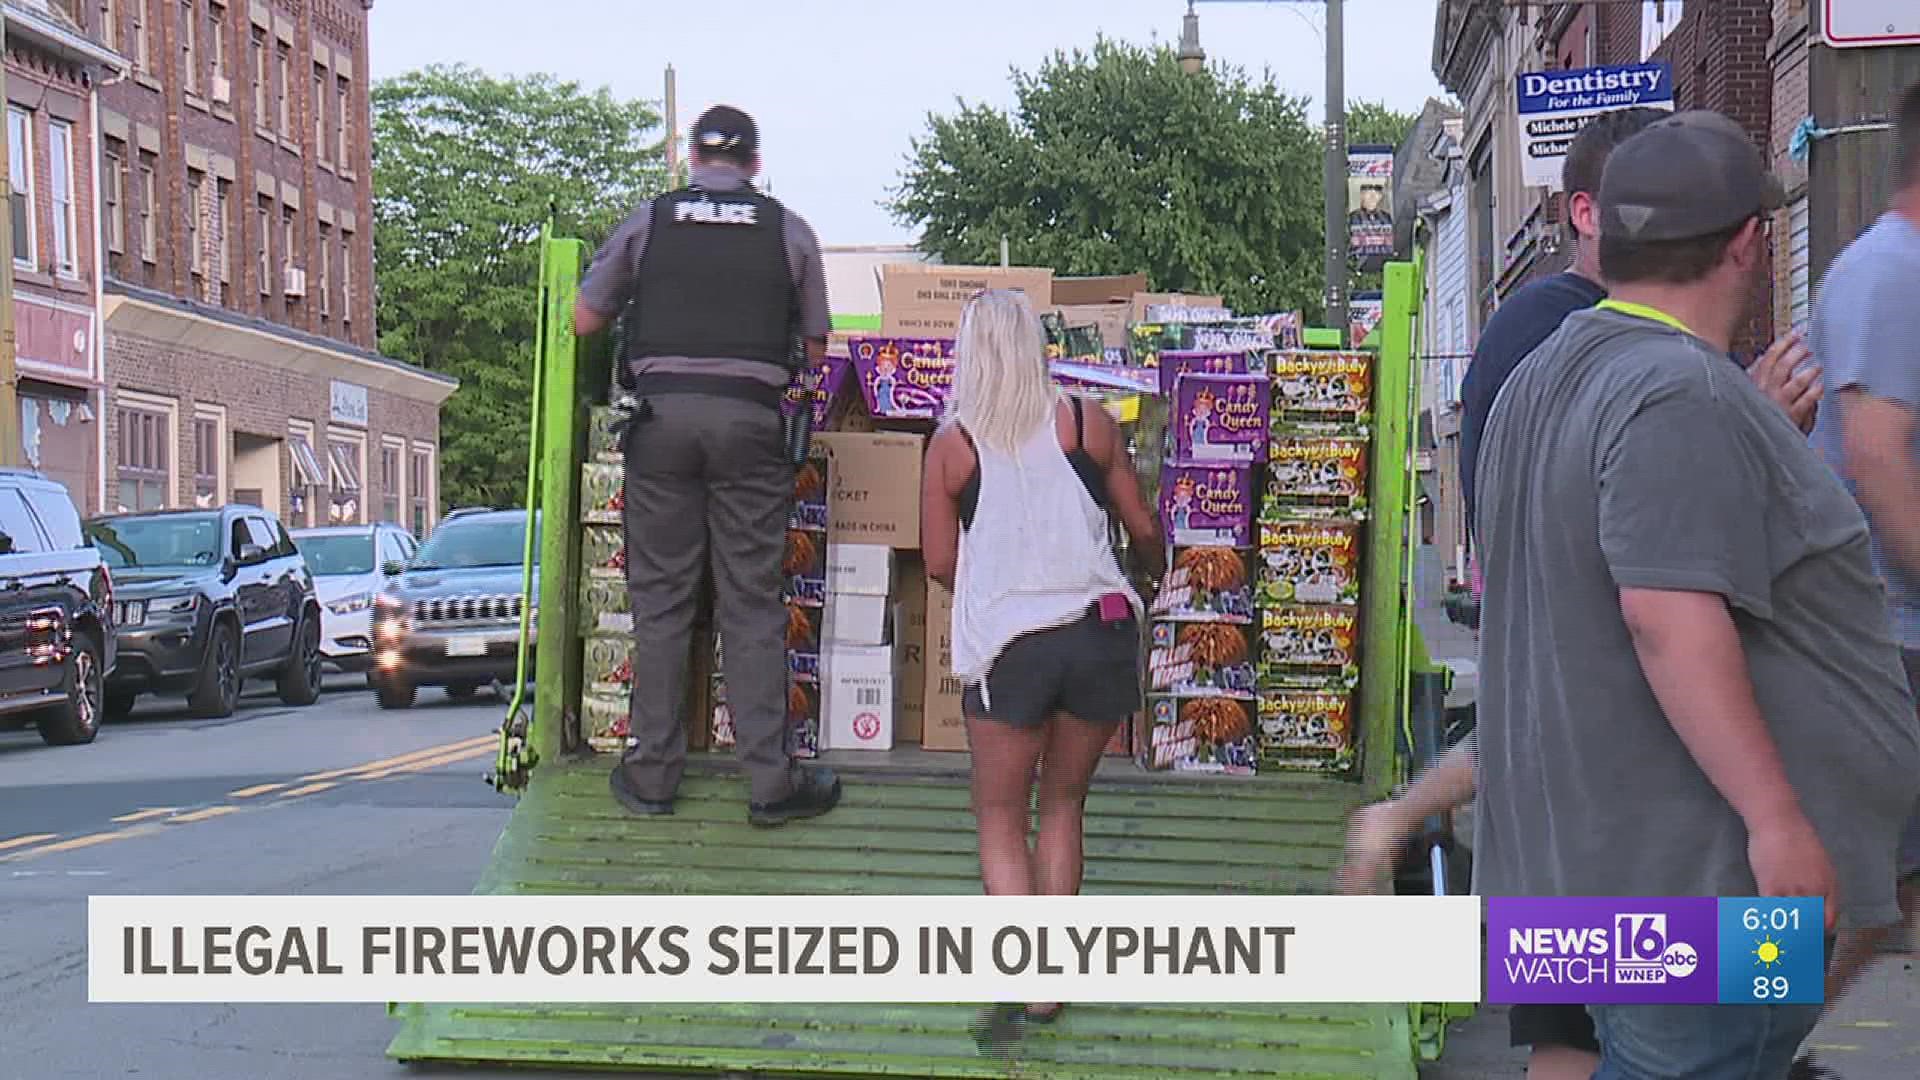 The Olyphant police chief says while the fireworks may not have been illegal, storing them in a building connected to others with no sprinkler system, was illegal.